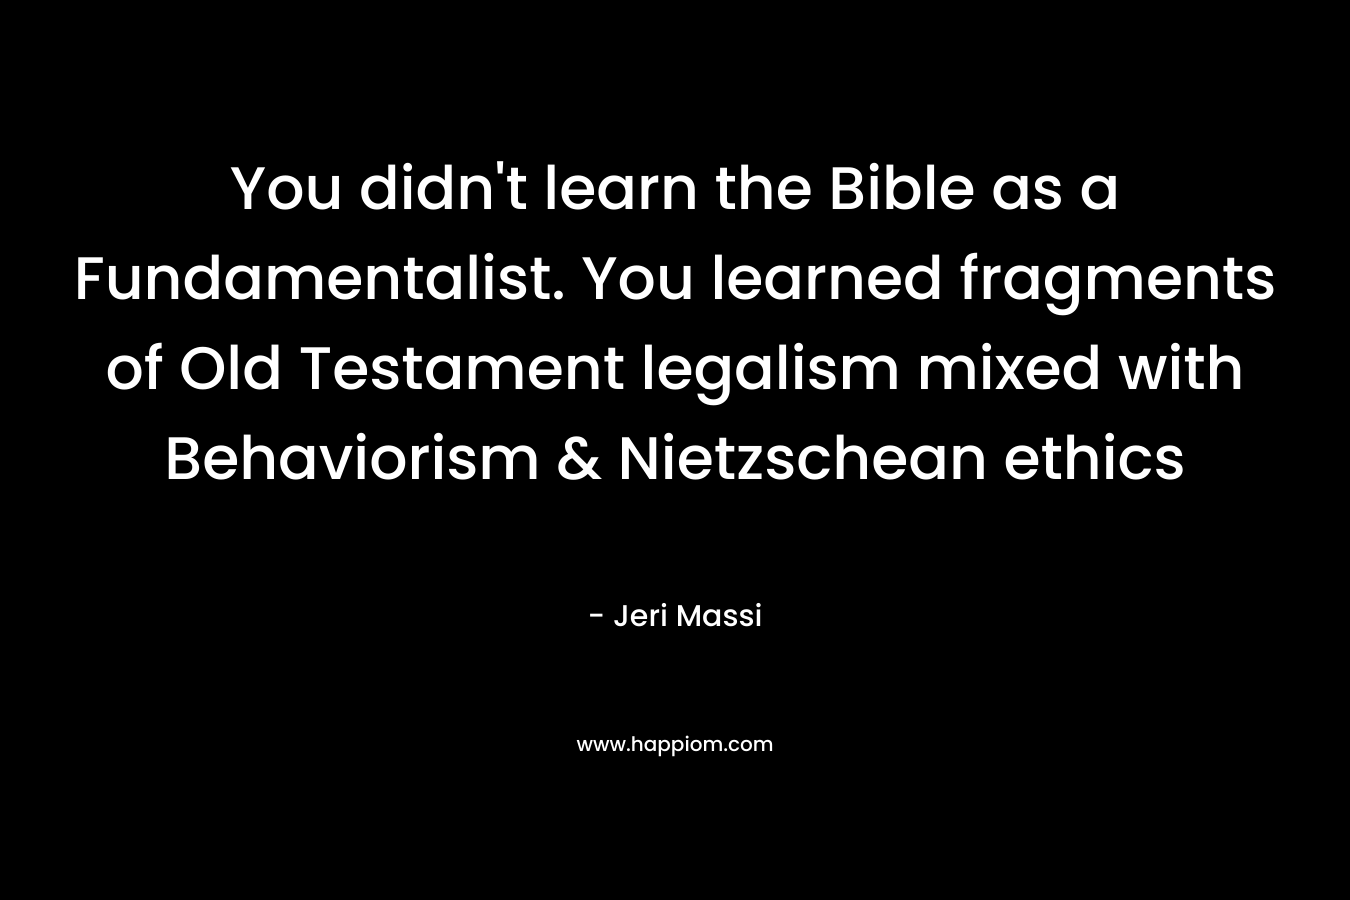 You didn't learn the Bible as a Fundamentalist. You learned fragments of Old Testament legalism mixed with Behaviorism & Nietzschean ethics